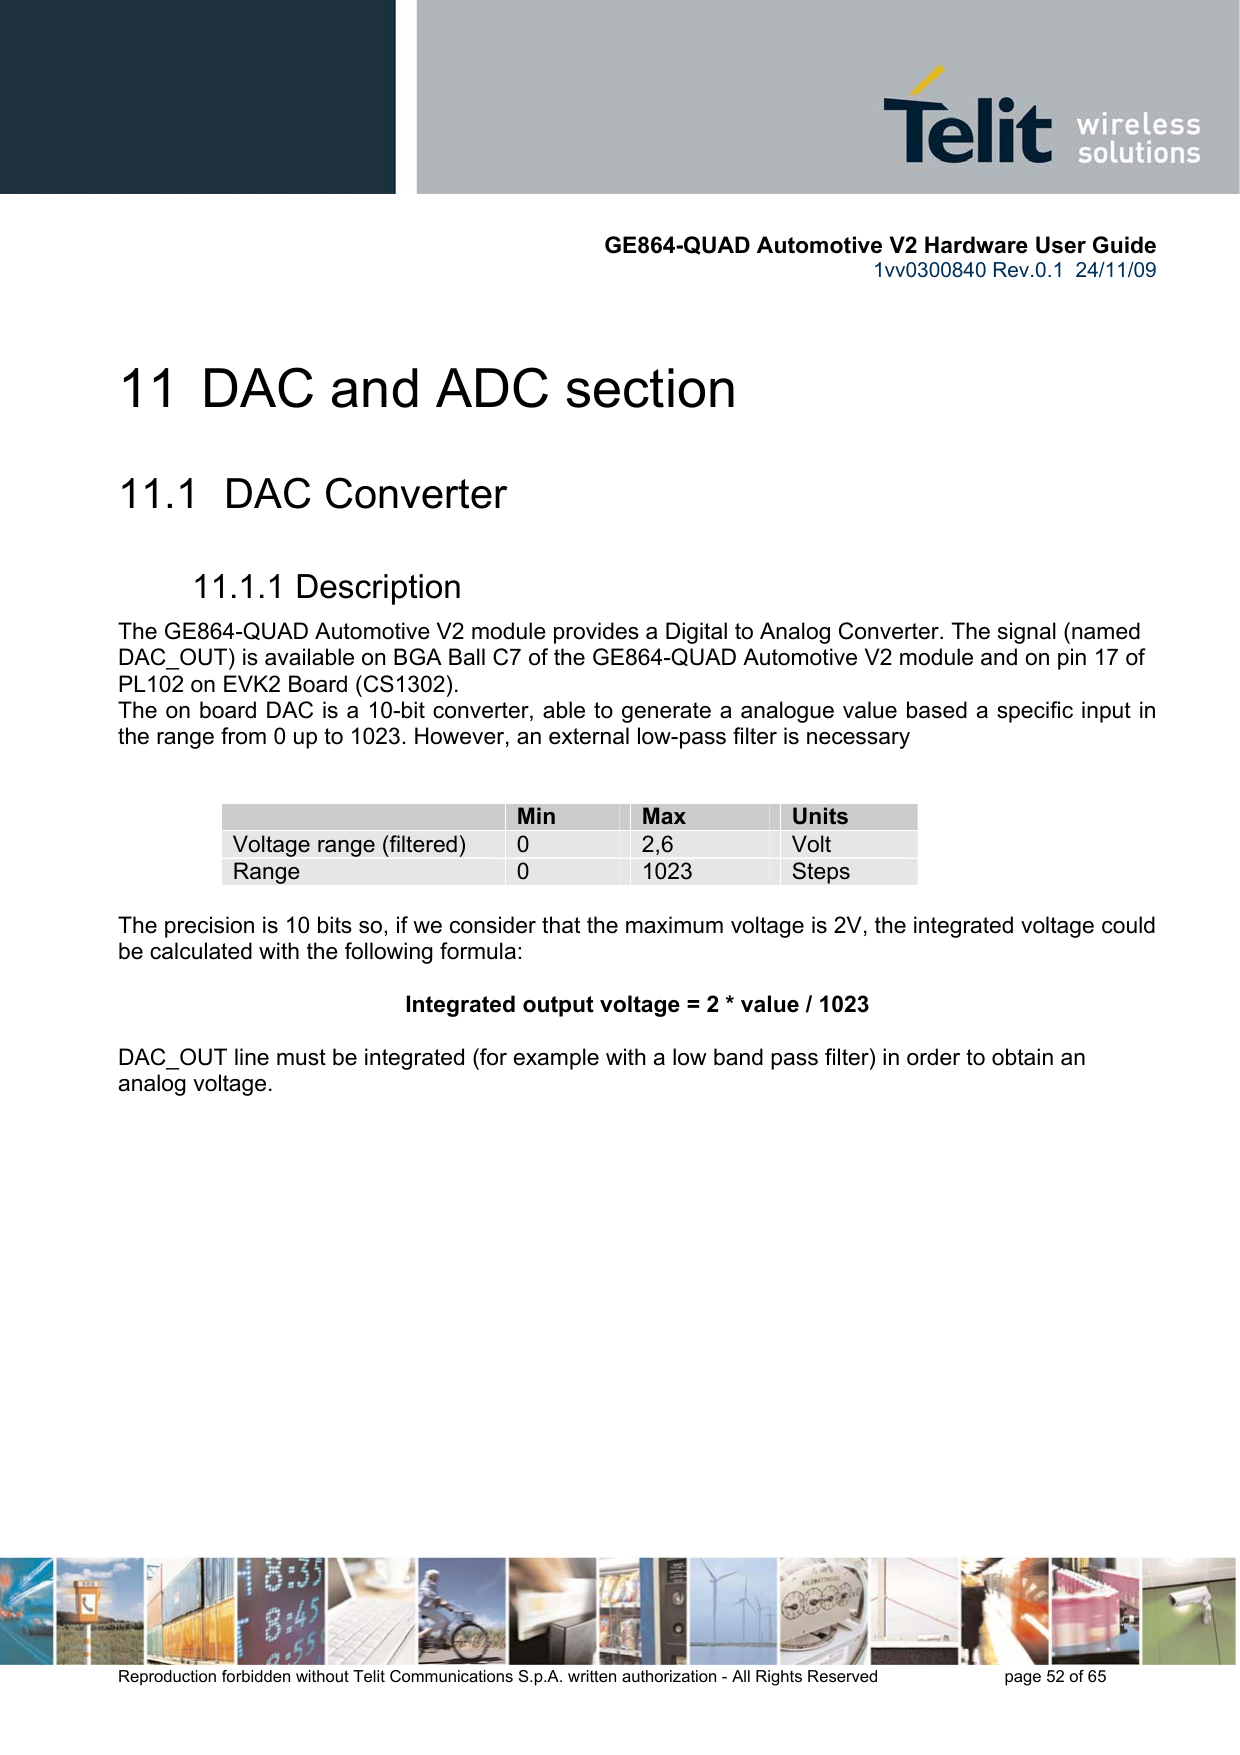       GE864-QUAD Automotive V2 Hardware User Guide 1vv0300840 Rev.0.1  24/11/09      Reproduction forbidden without Telit Communications S.p.A. written authorization - All Rights Reserved    page 52 of 65  11  DAC and ADC section 11.1   DAC Converter 11.1.1 Description The GE864-QUAD Automotive V2 module provides a Digital to Analog Converter. The signal (named DAC_OUT) is available on BGA Ball C7 of the GE864-QUAD Automotive V2 module and on pin 17 of PL102 on EVK2 Board (CS1302). The on board DAC is a 10-bit converter, able to generate a analogue value based a specific input in the range from 0 up to 1023. However, an external low-pass filter is necessary    Min  Max  Units Voltage range (filtered)  0  2,6  Volt Range  0  1023  Steps  The precision is 10 bits so, if we consider that the maximum voltage is 2V, the integrated voltage could be calculated with the following formula:  Integrated output voltage = 2 * value / 1023  DAC_OUT line must be integrated (for example with a low band pass filter) in order to obtain an analog voltage. 